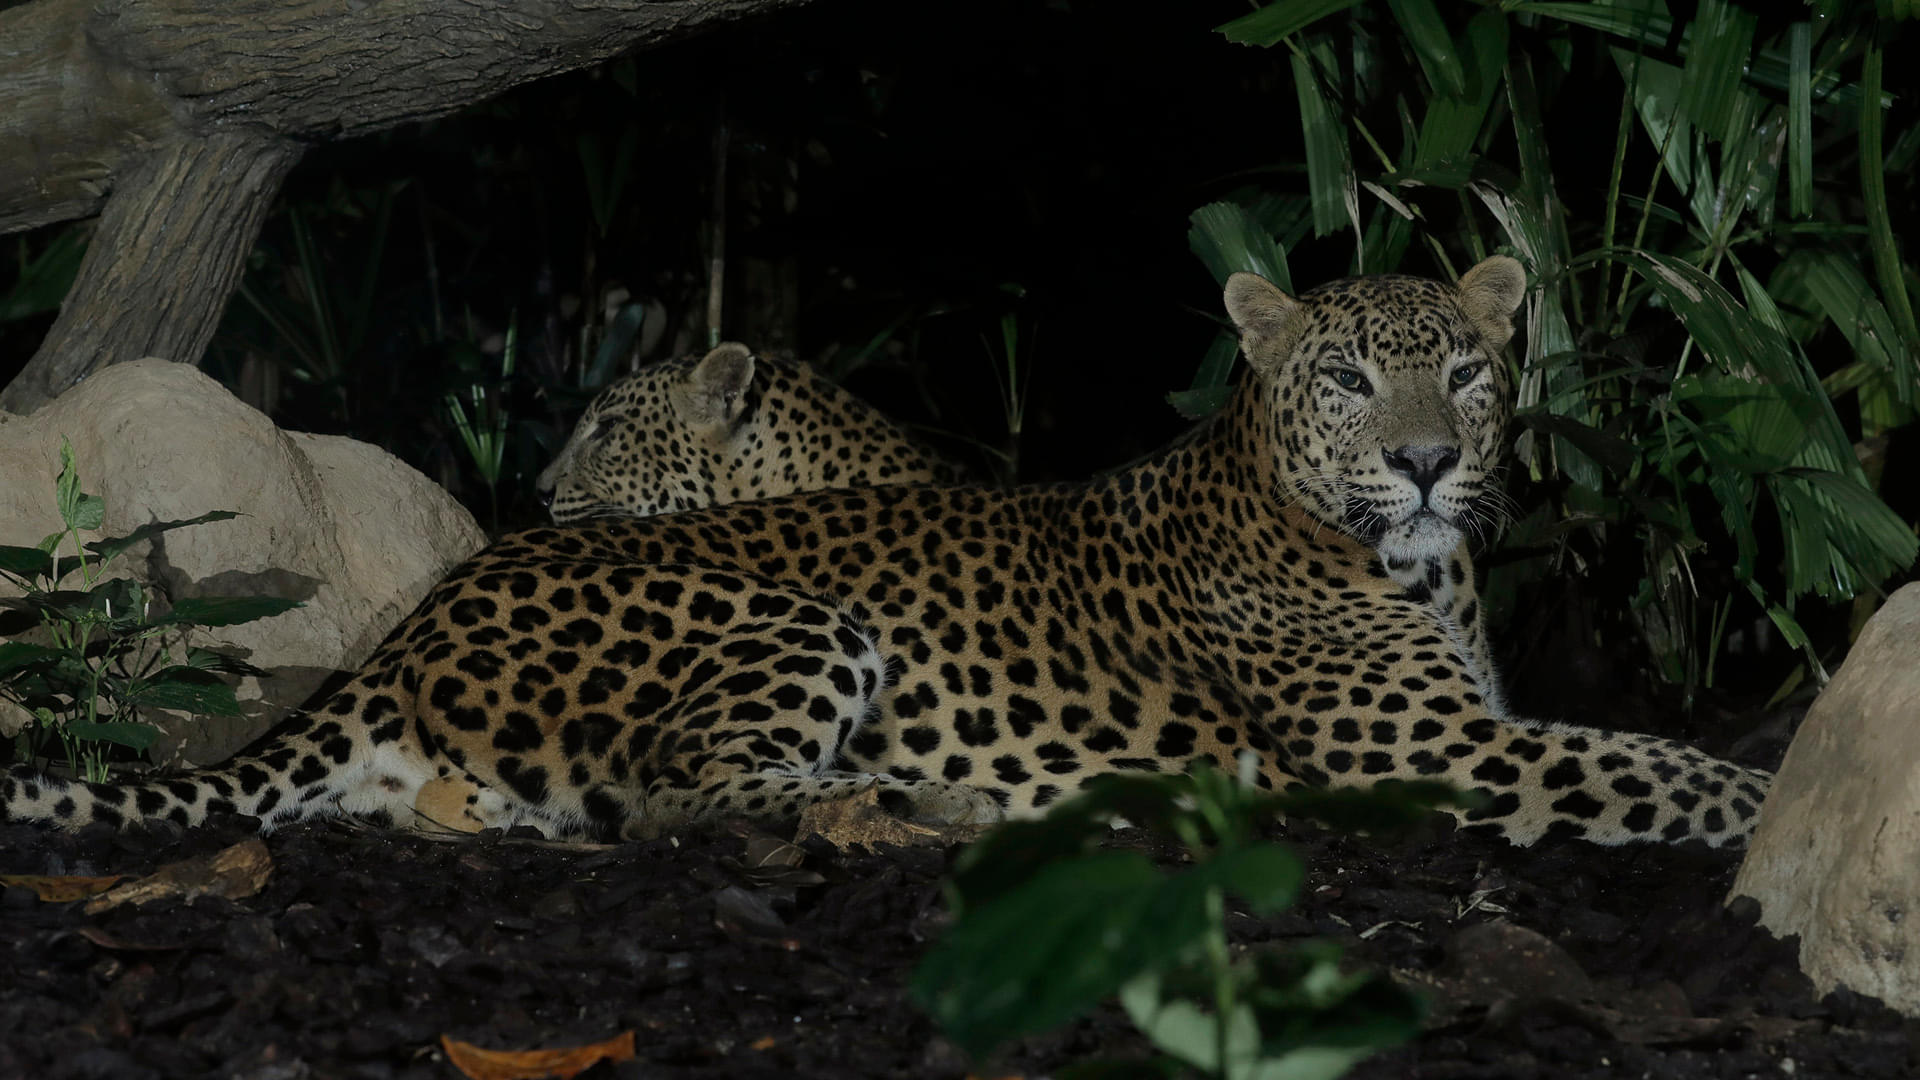 See the nightly routine of Leopards as you go through the Leopard Trail